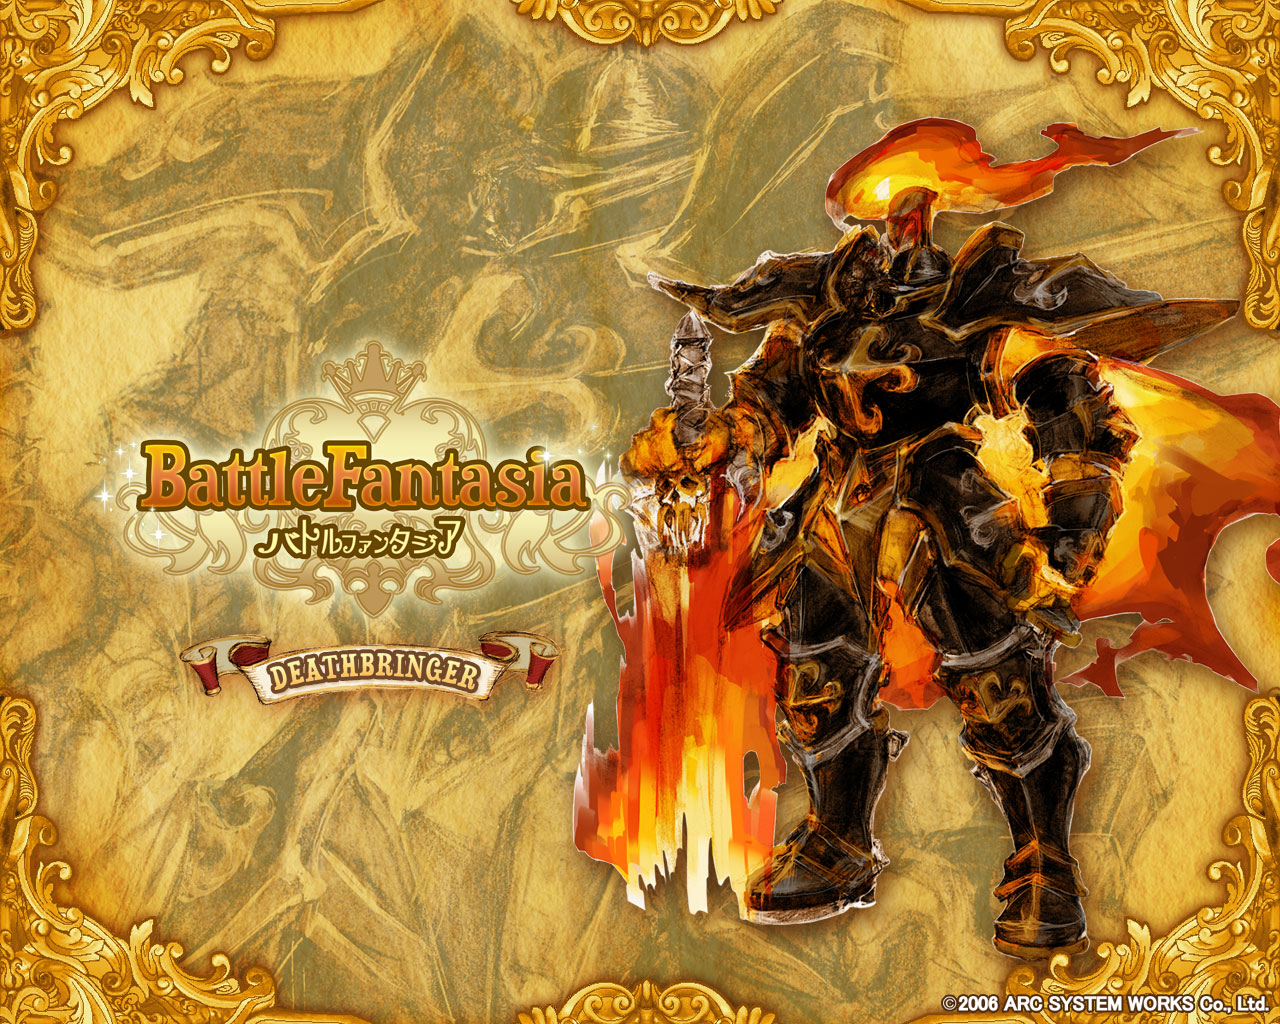 1280x1024 > Battle Fantasia -Revised Edition- Wallpapers